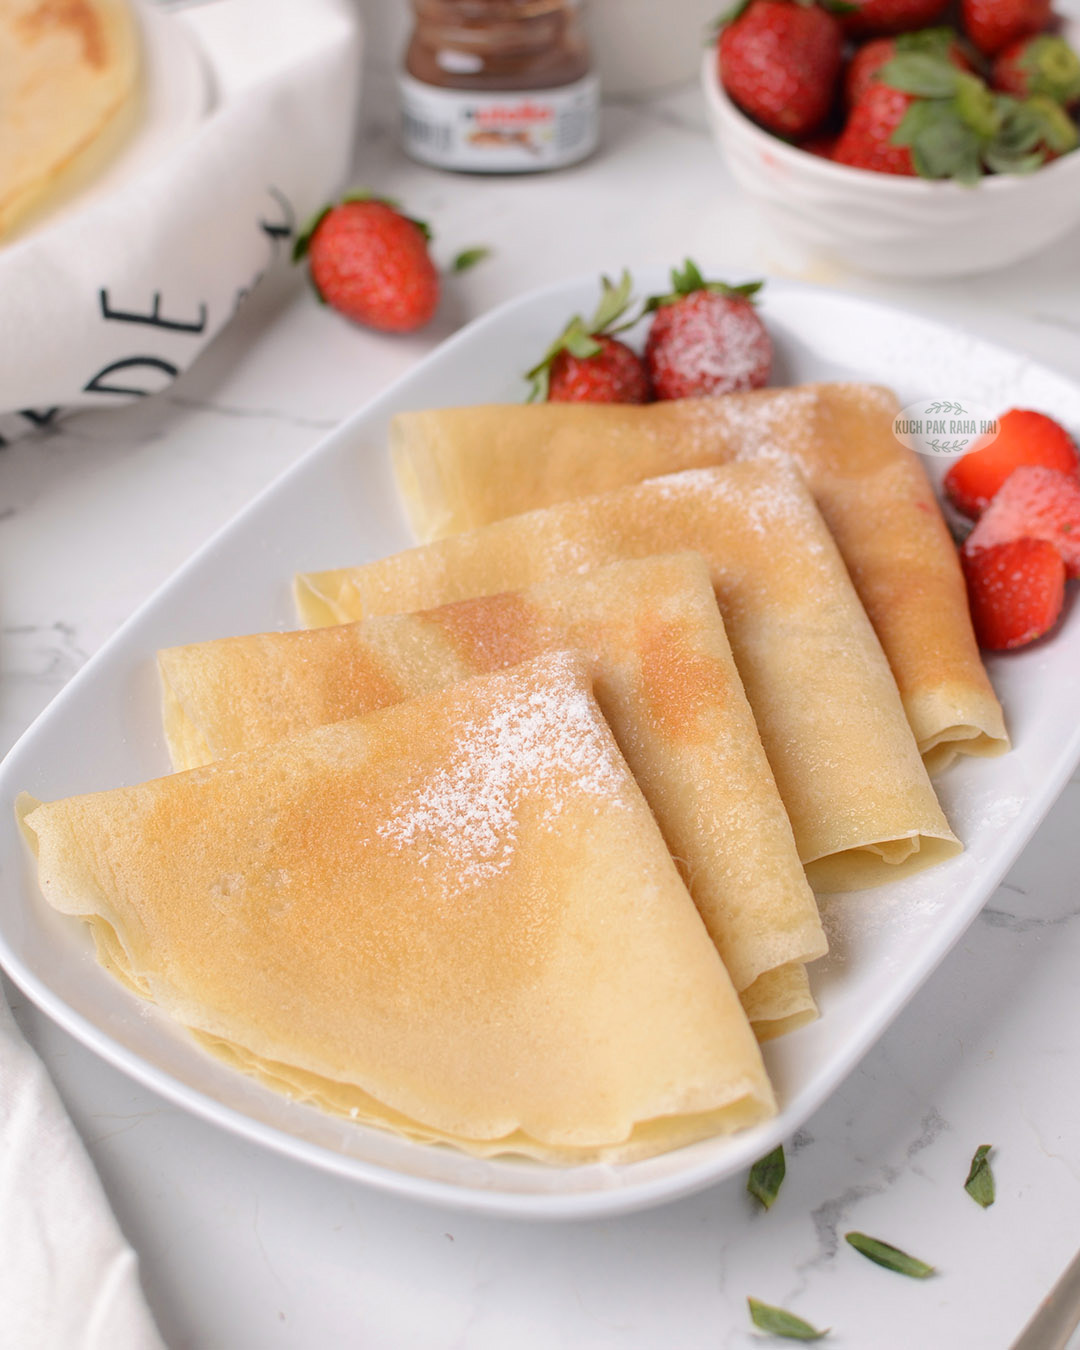 Crepe recipe without milk and eggs.